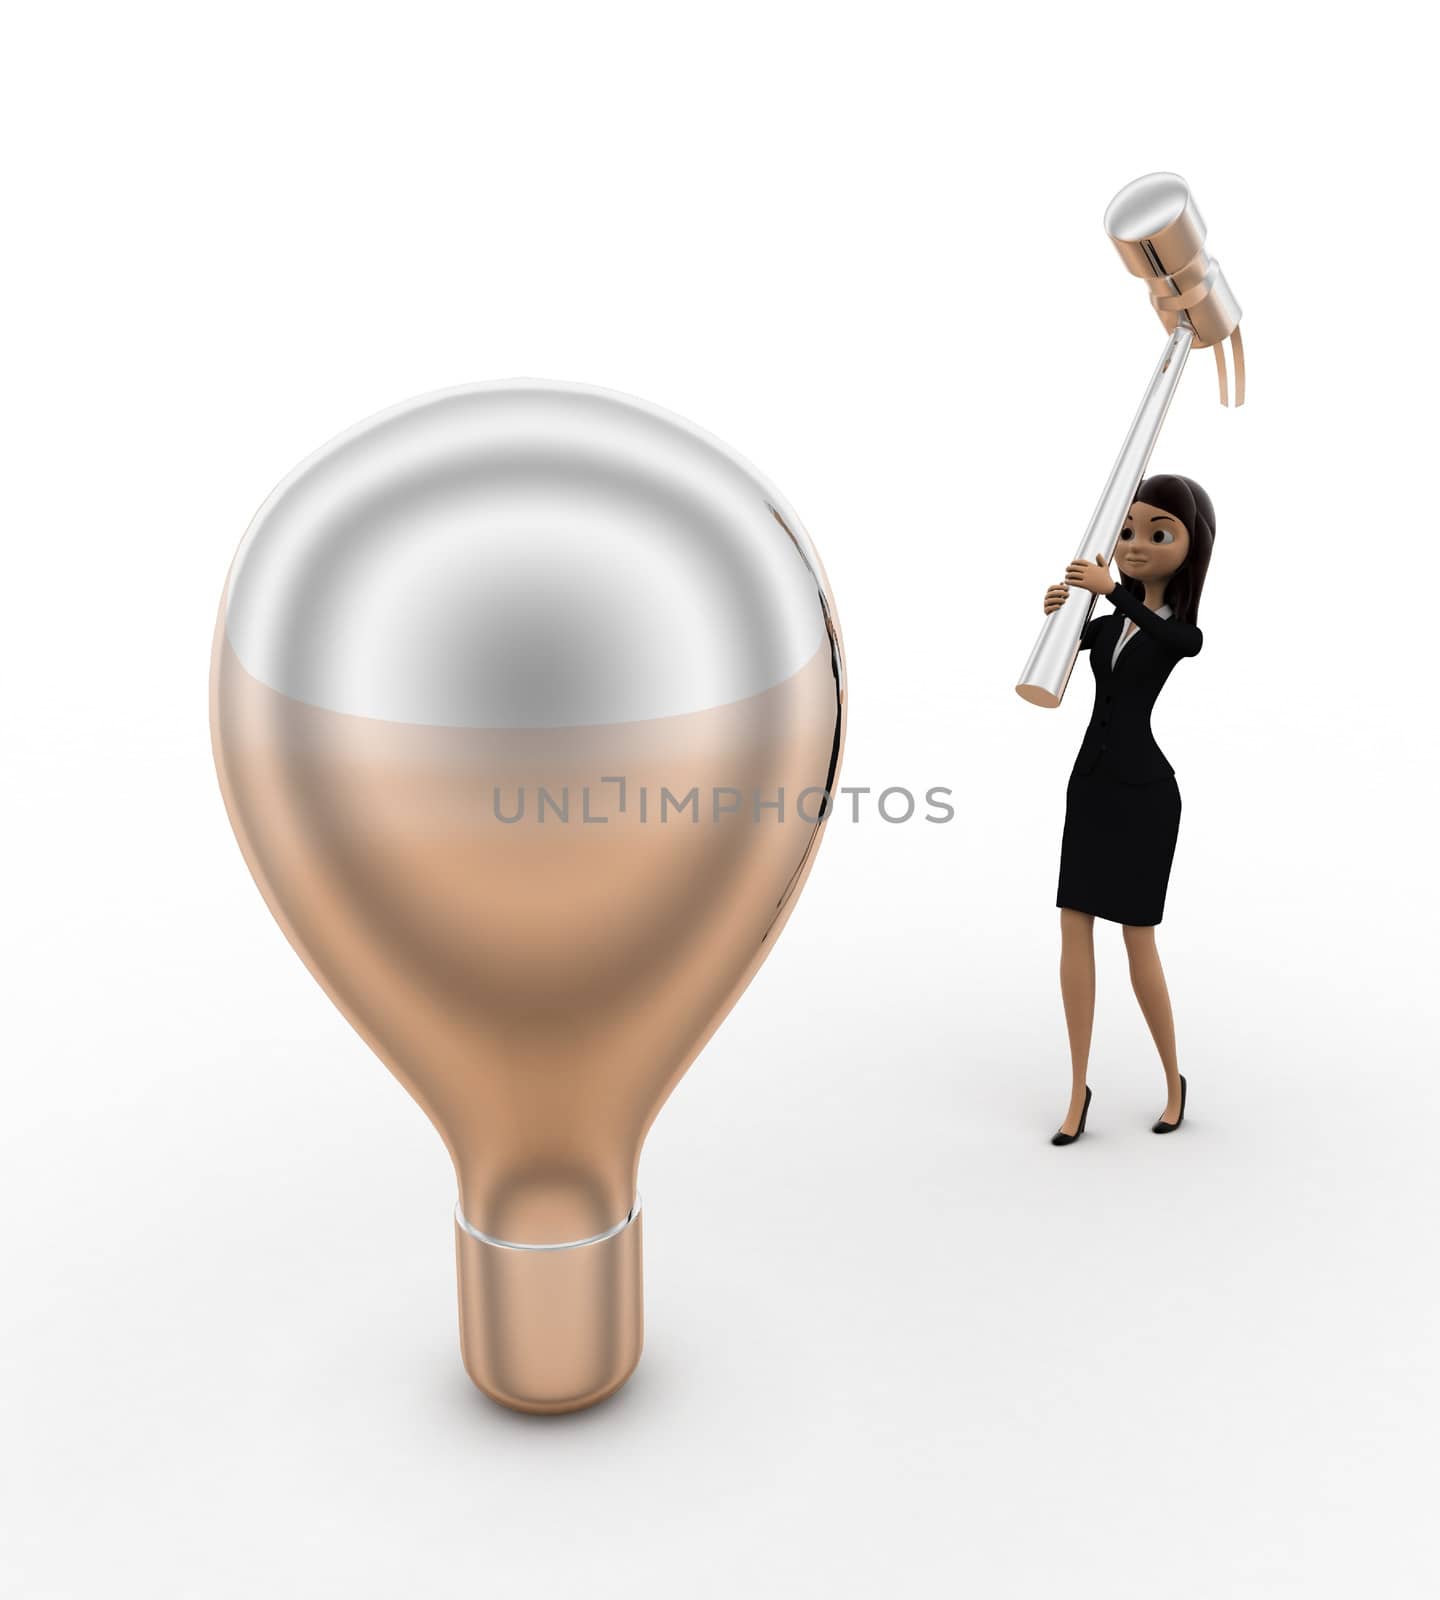 3d woman about hit silver bulb with big hammer concept on white background, front angle view